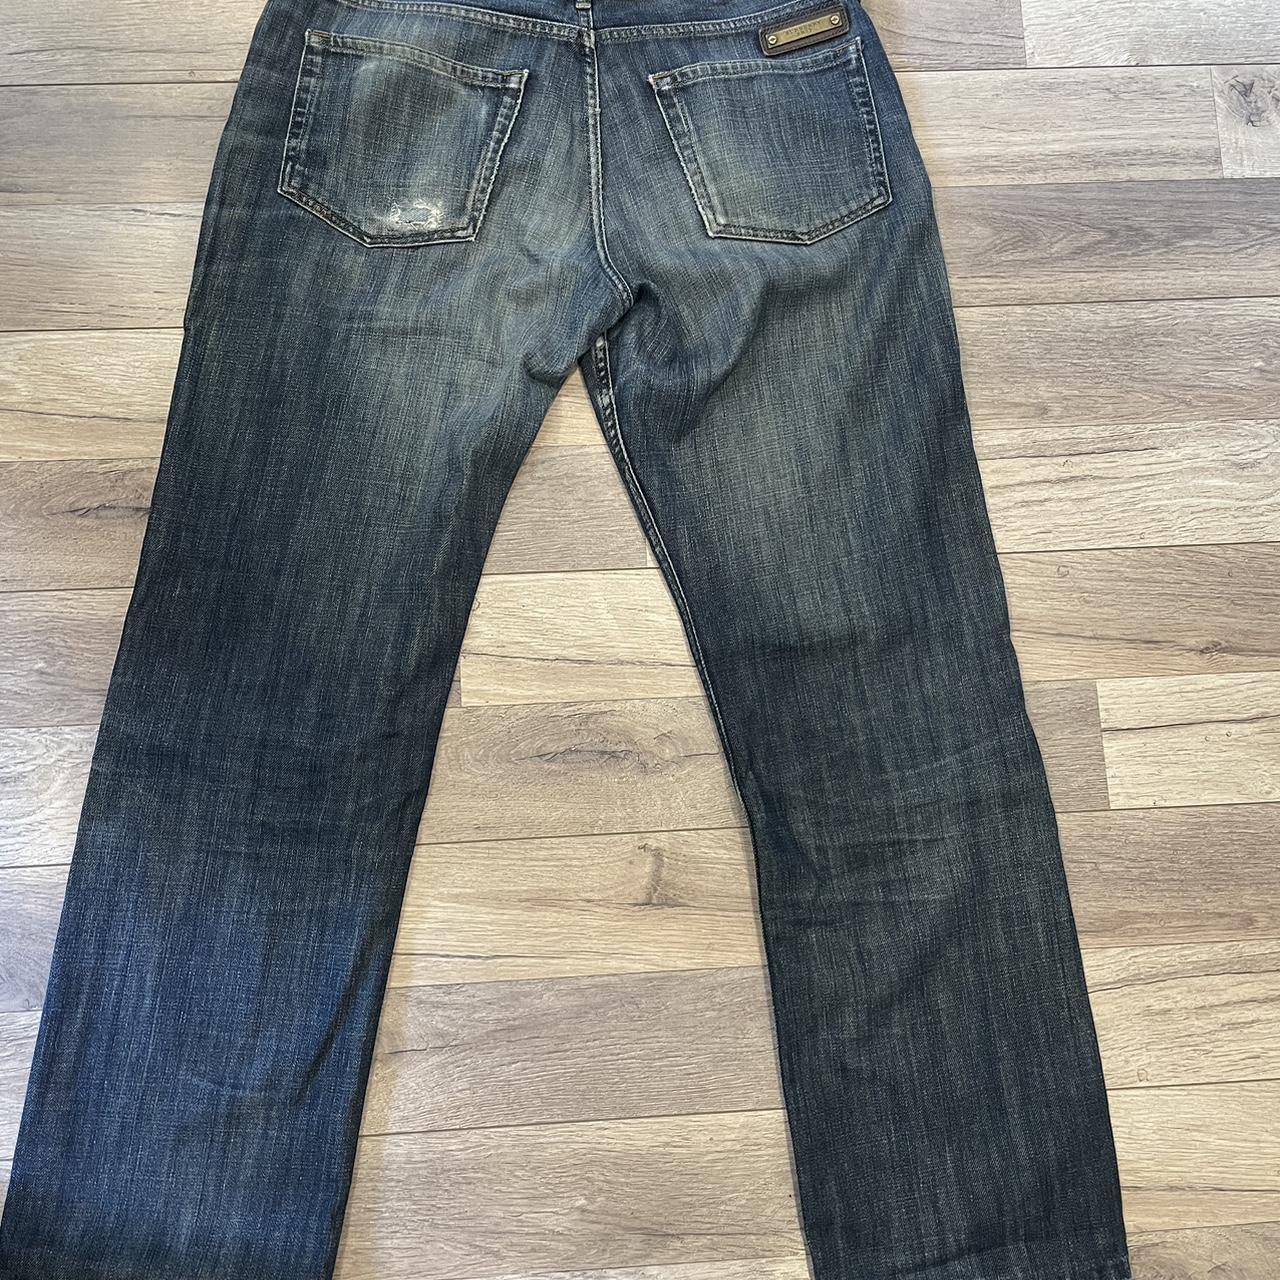 Burberry Brit Men's Navy and Blue Jeans (2)